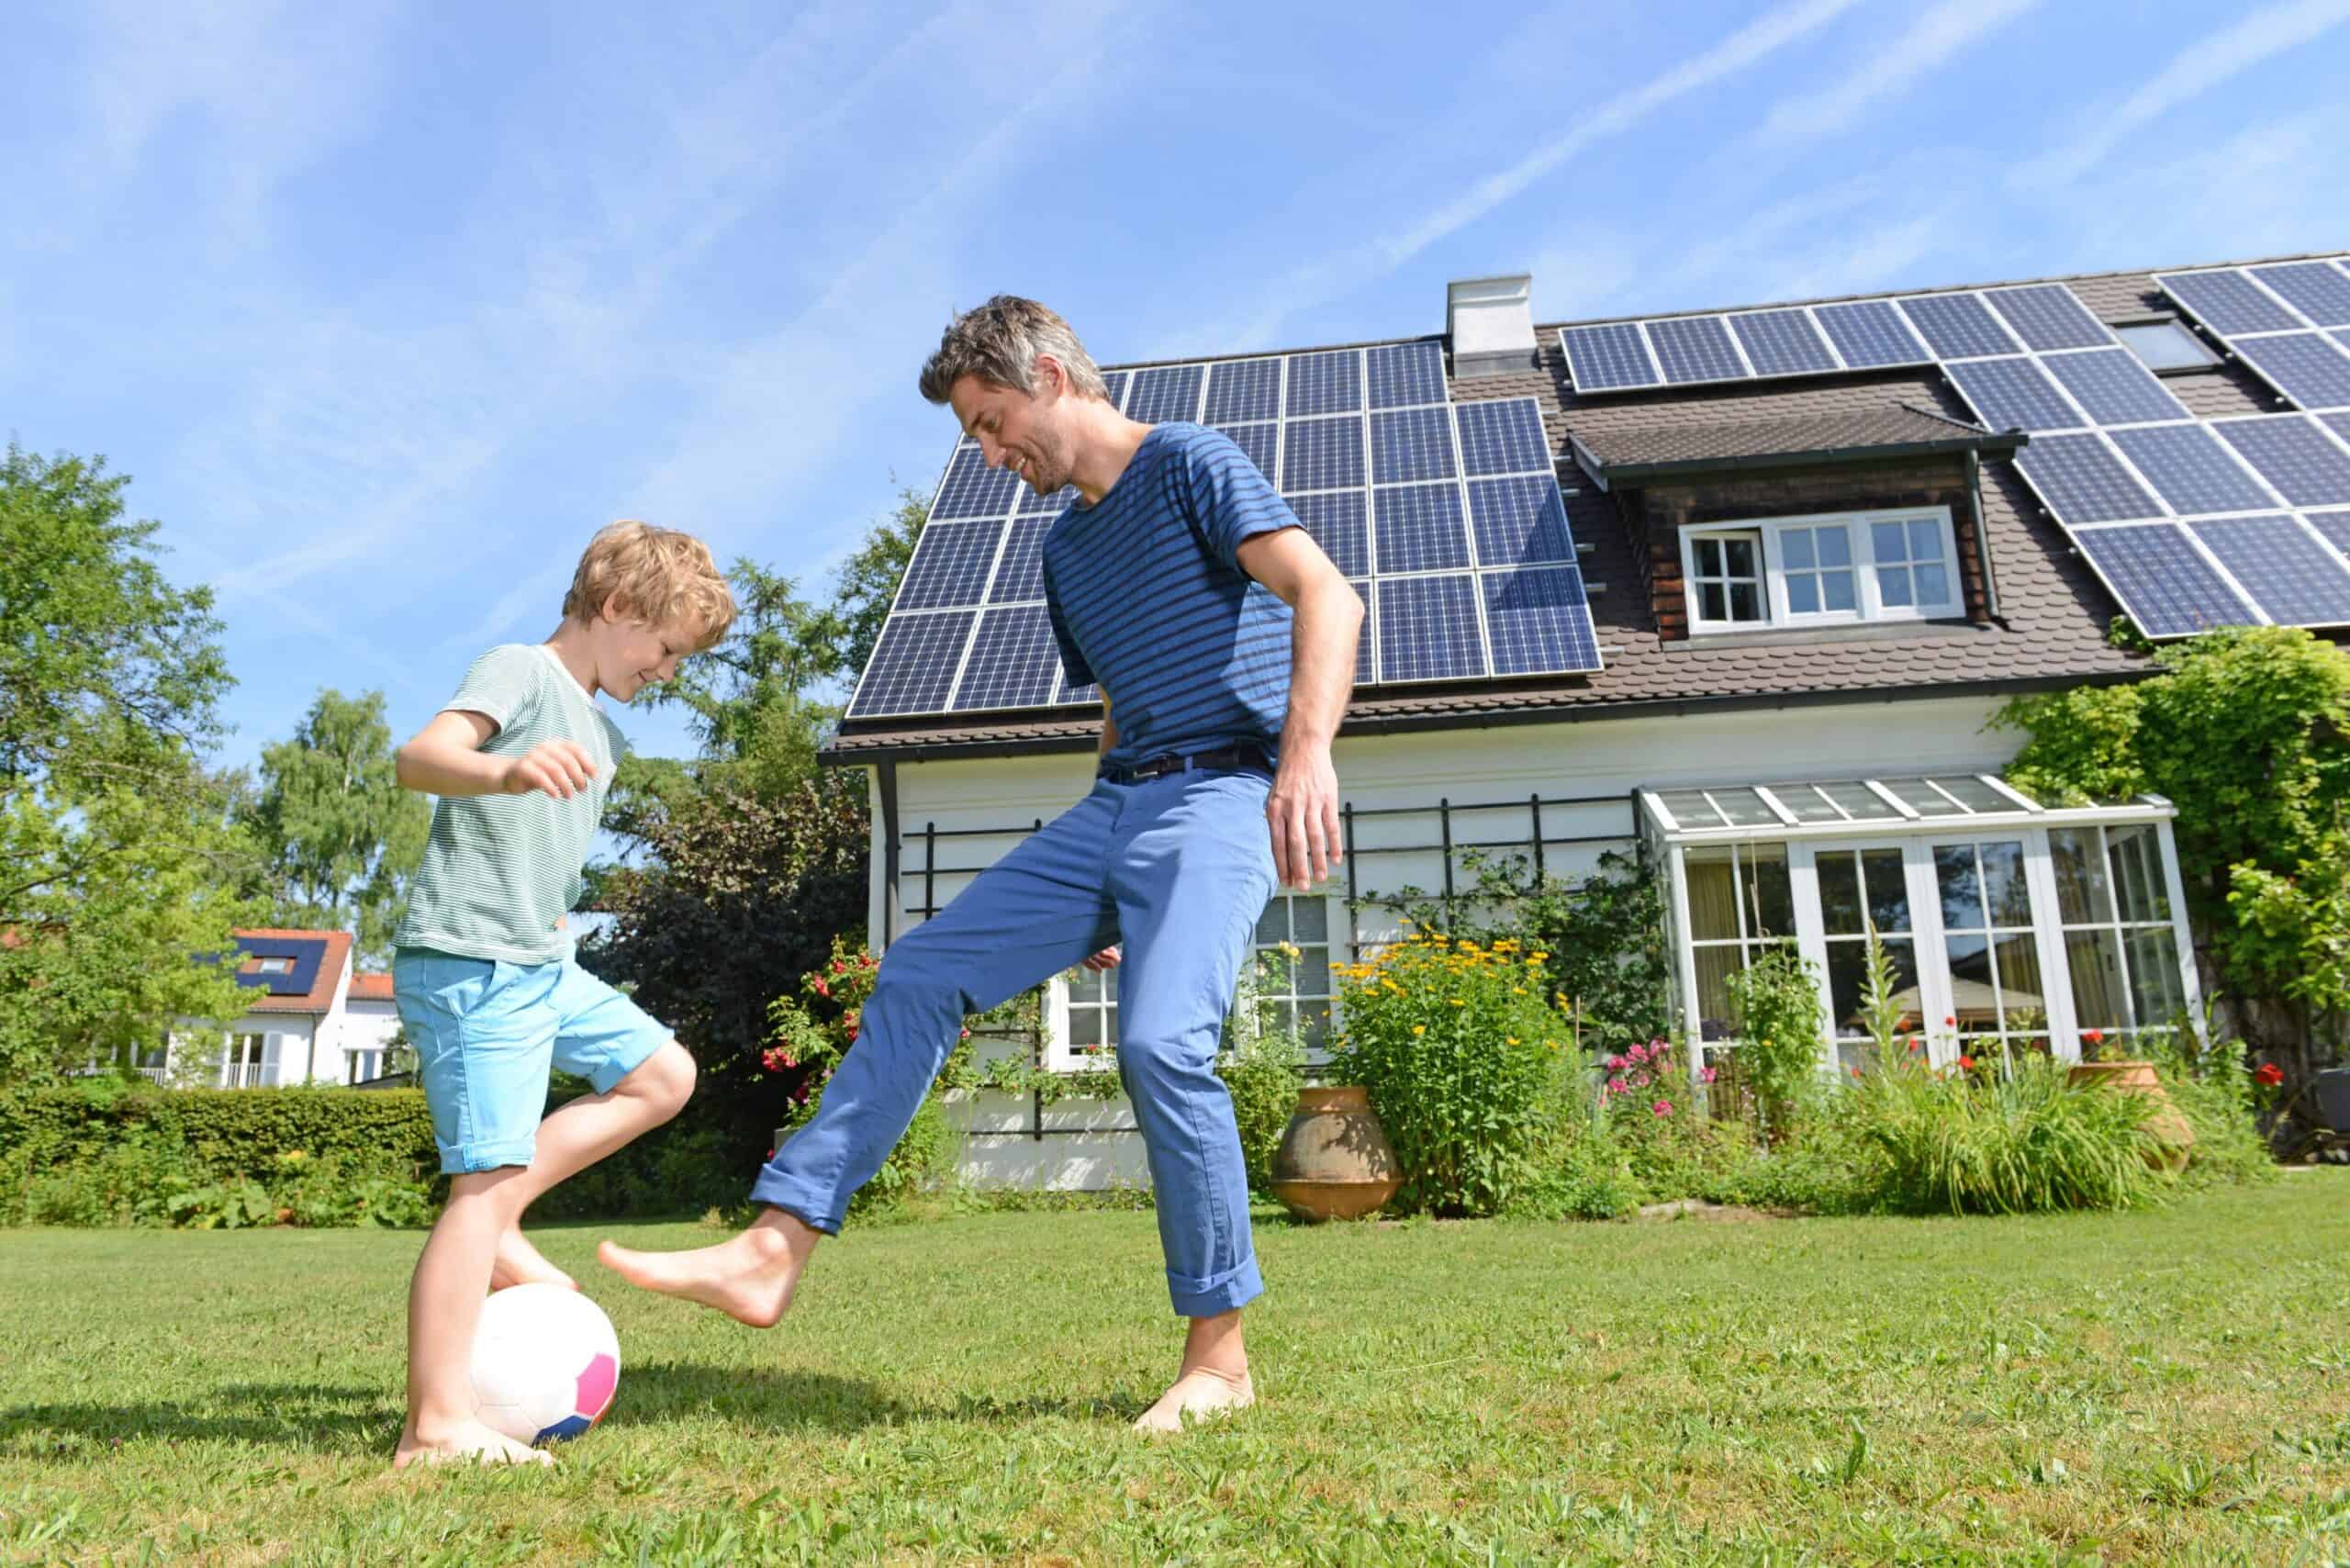 Father and son playing yard soccer with solar panels in background